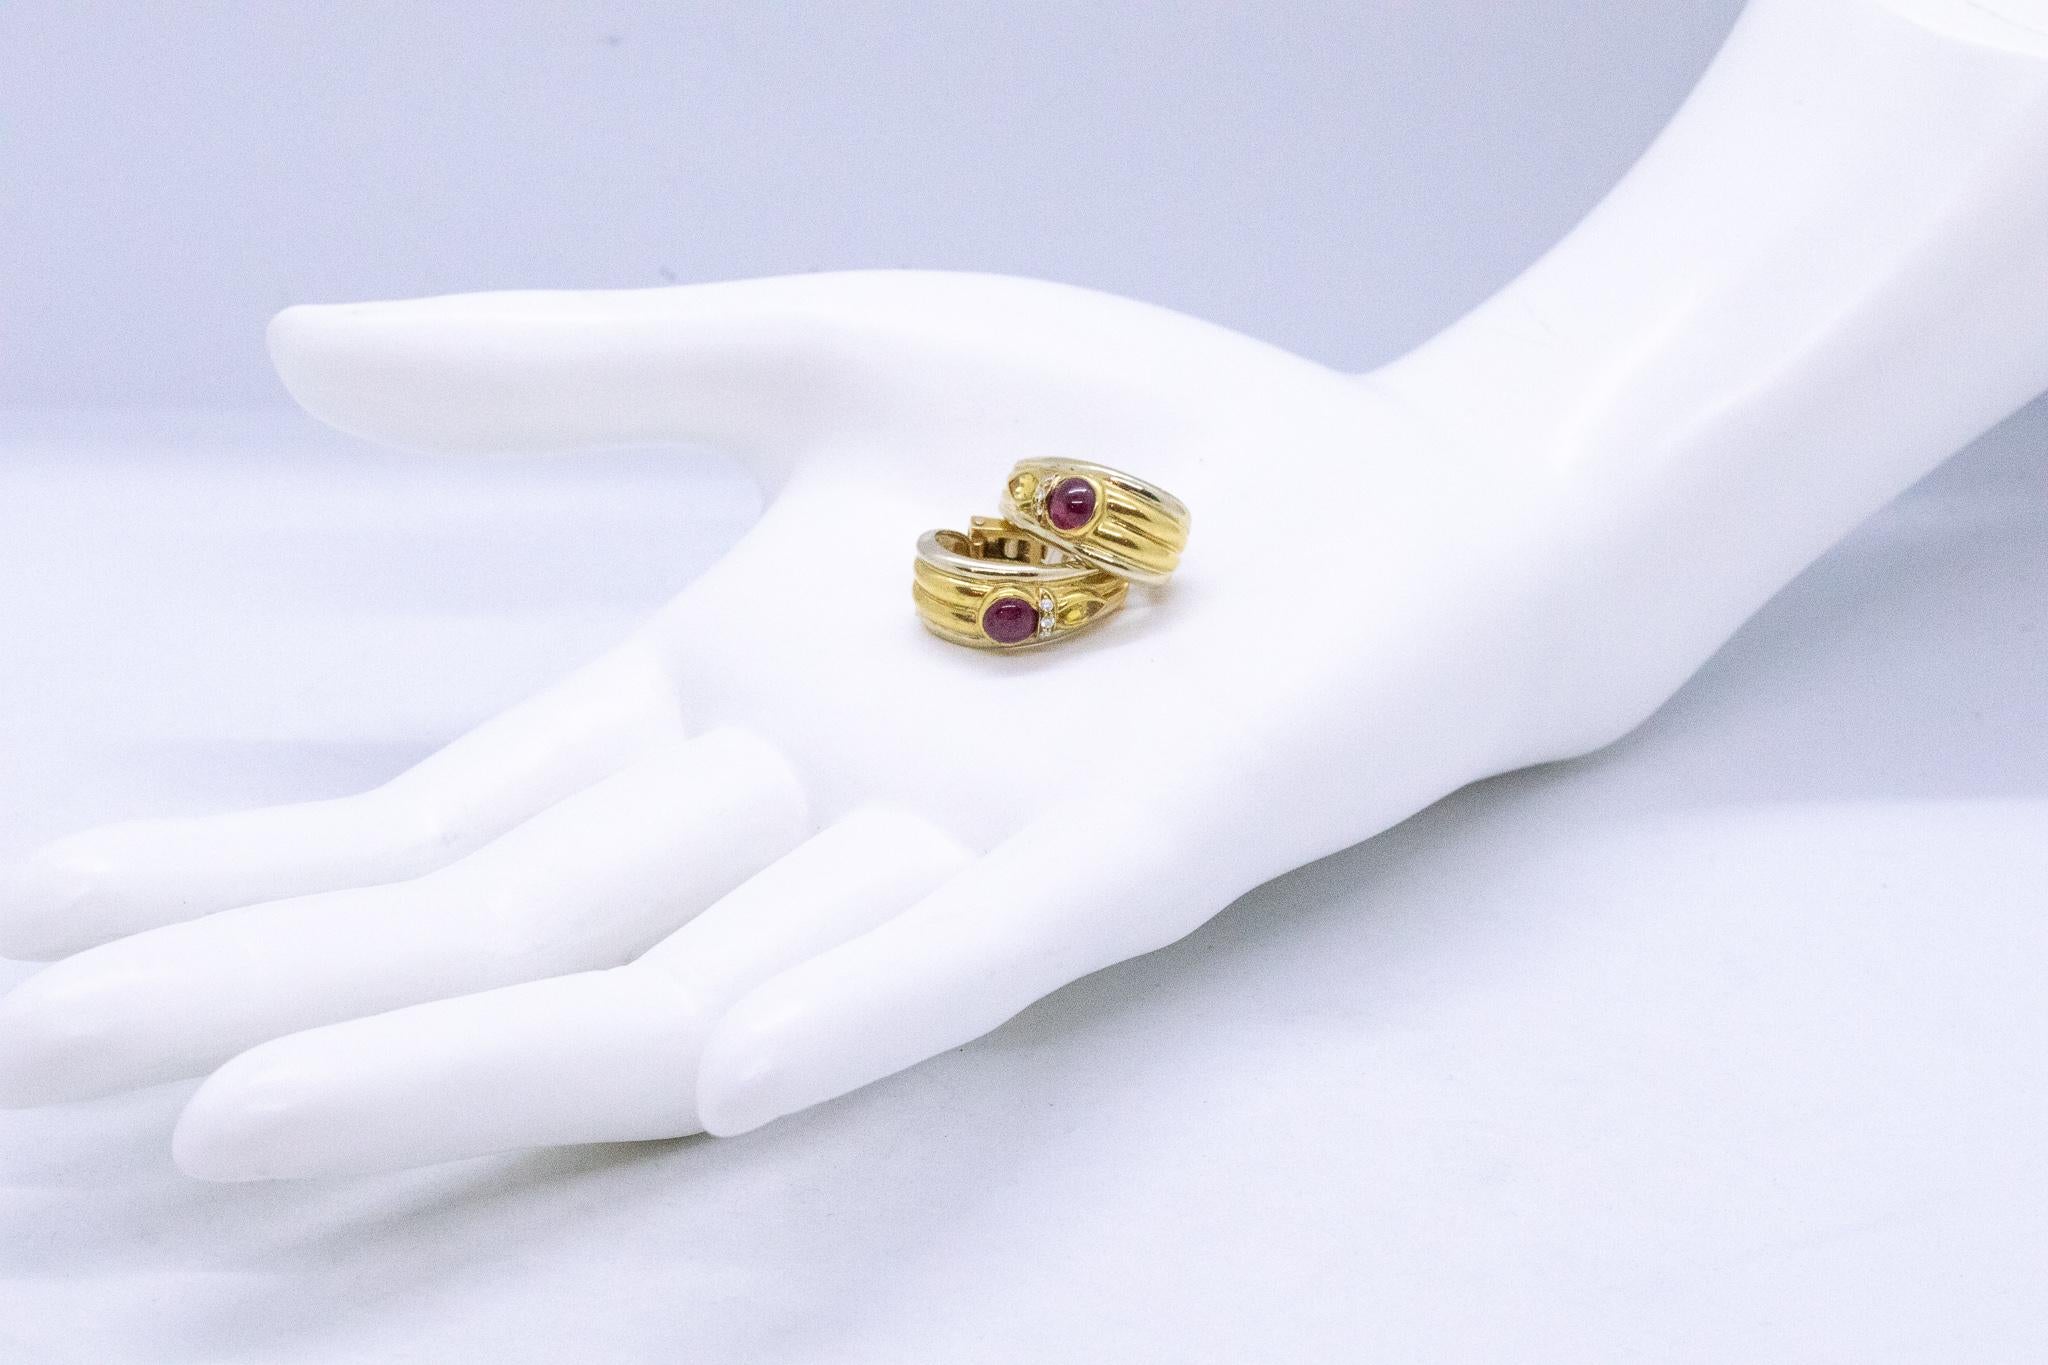 Mixed Cut Chaumet Paris Clips Earrings in 18Kt Gold with 2.34 Cts Rubies Sapphires Diamond